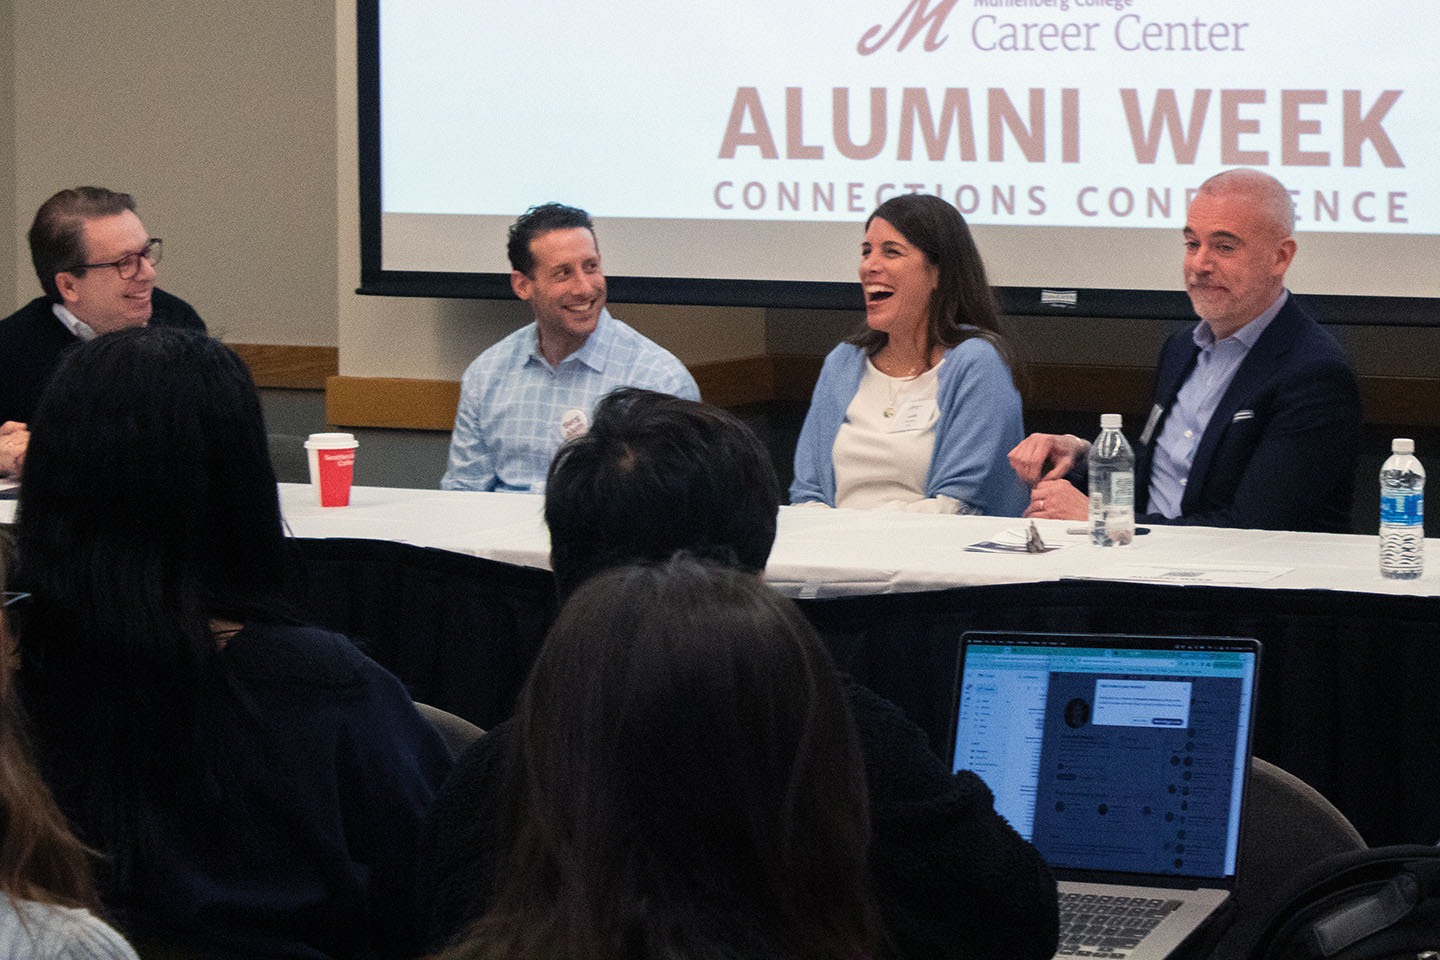 Four people on a panel sit at a table in front of a group of students